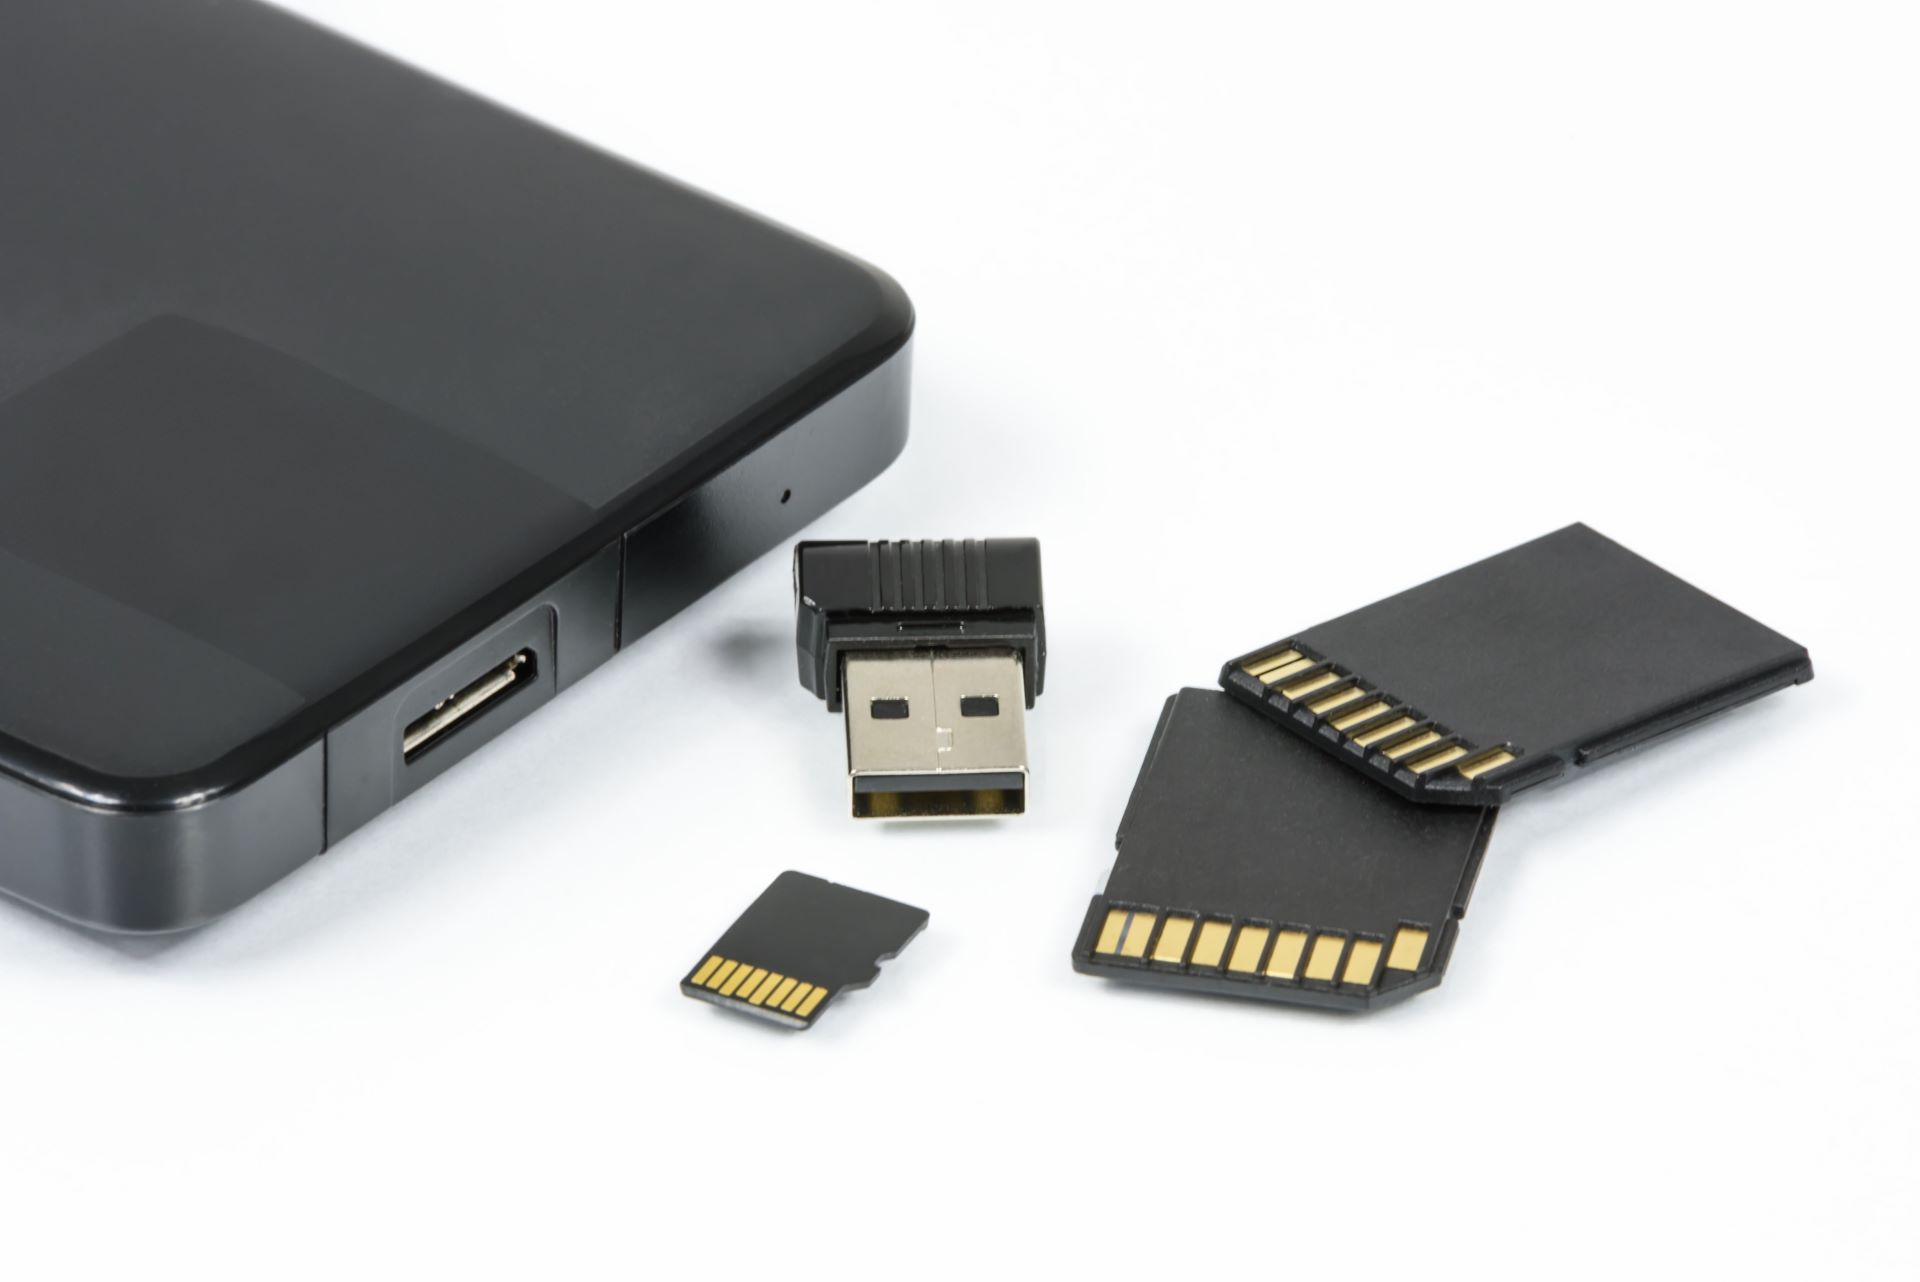 Black external hard drive, usb stick, and flash cards on a white surface